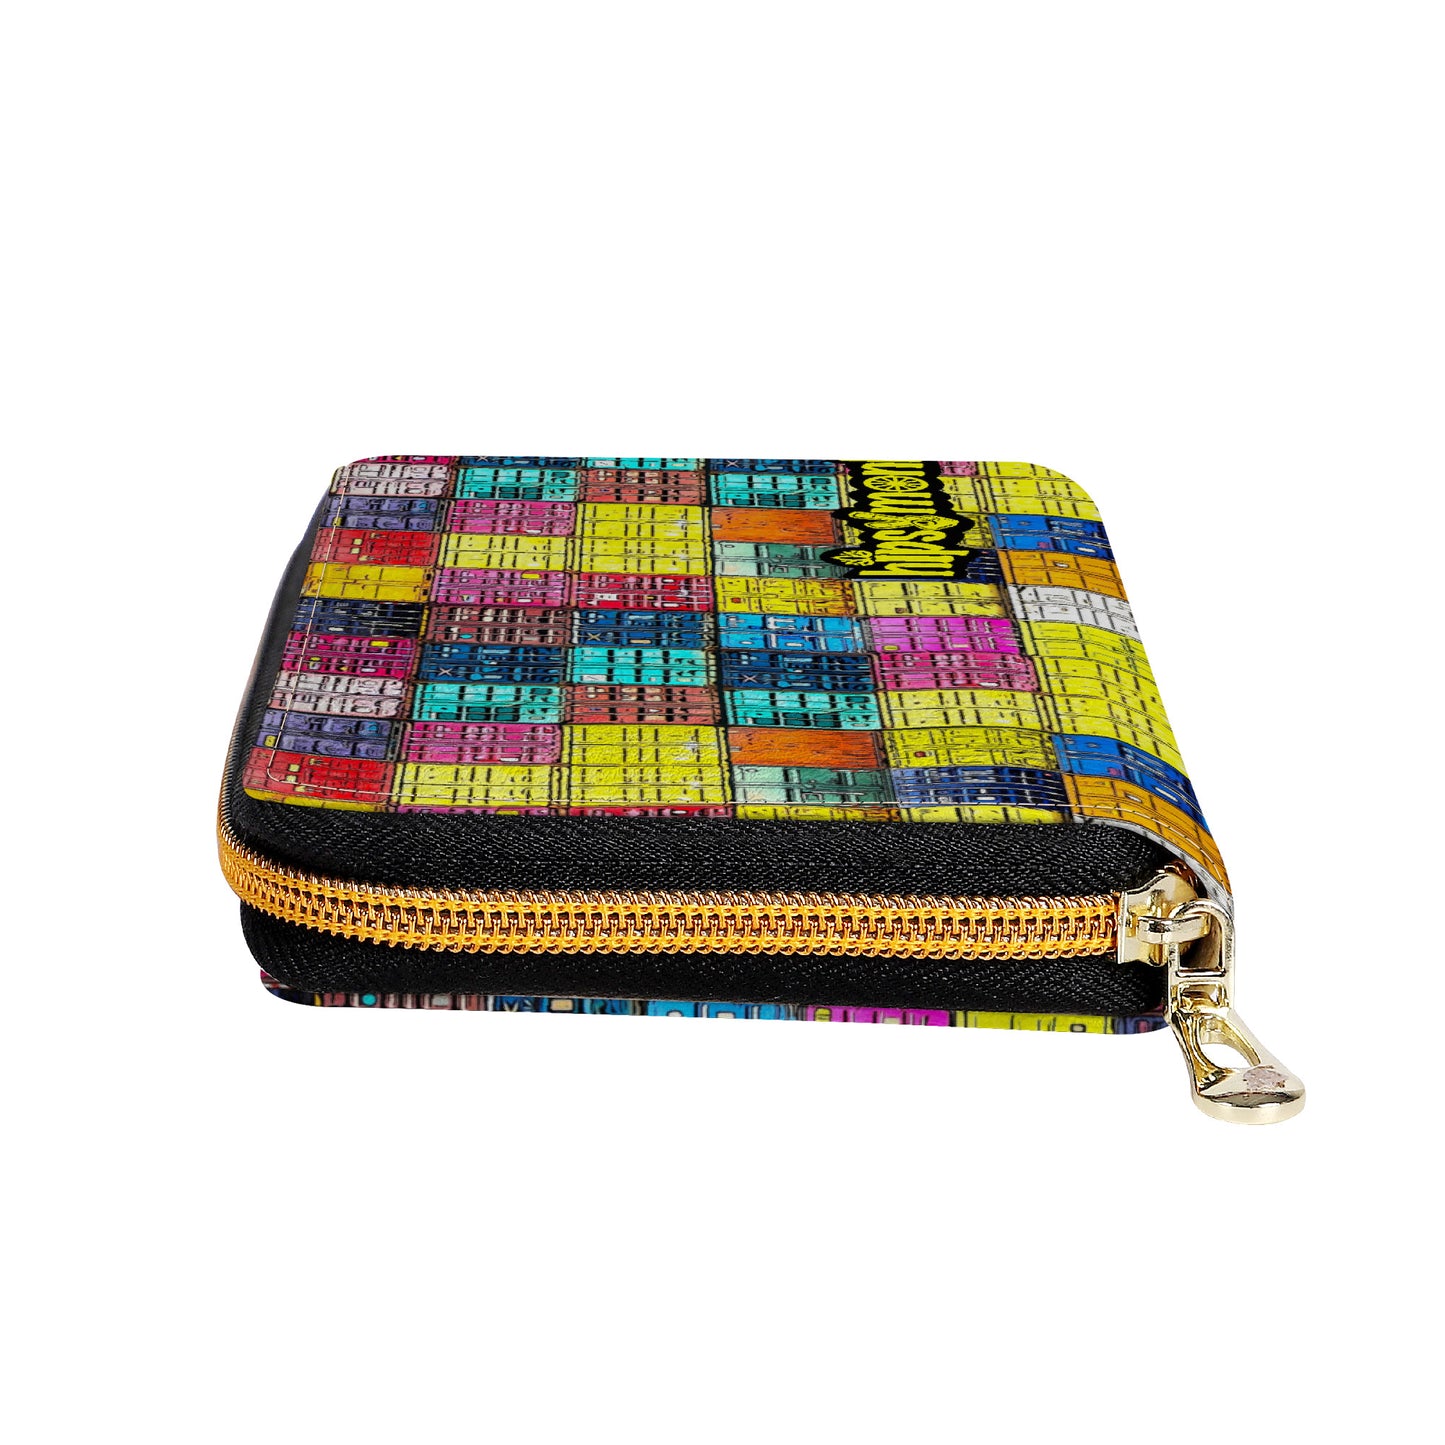 "Shipping Containers" Zipper Purse Clutch Bag